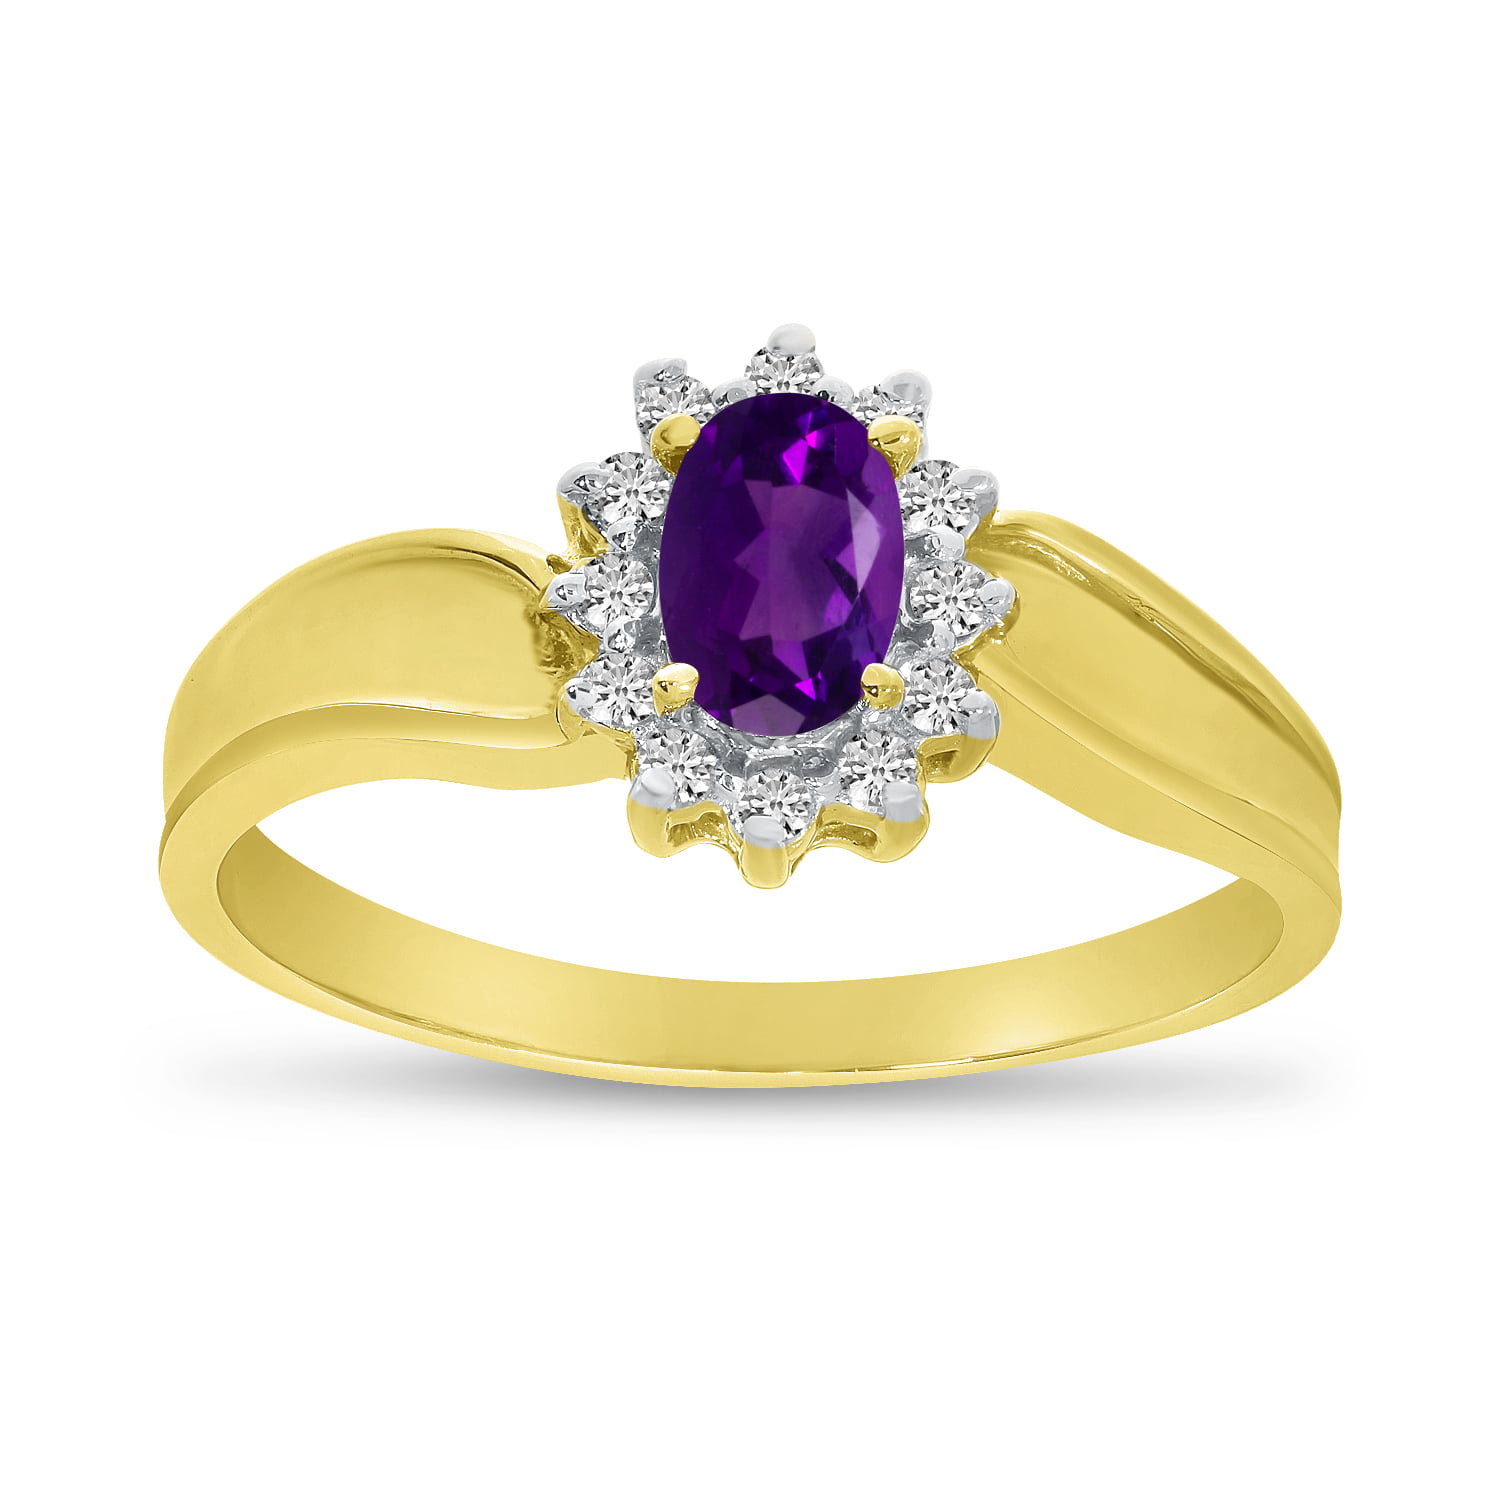 10k Yellow Gold Oval Amethyst And Diamond Ring 